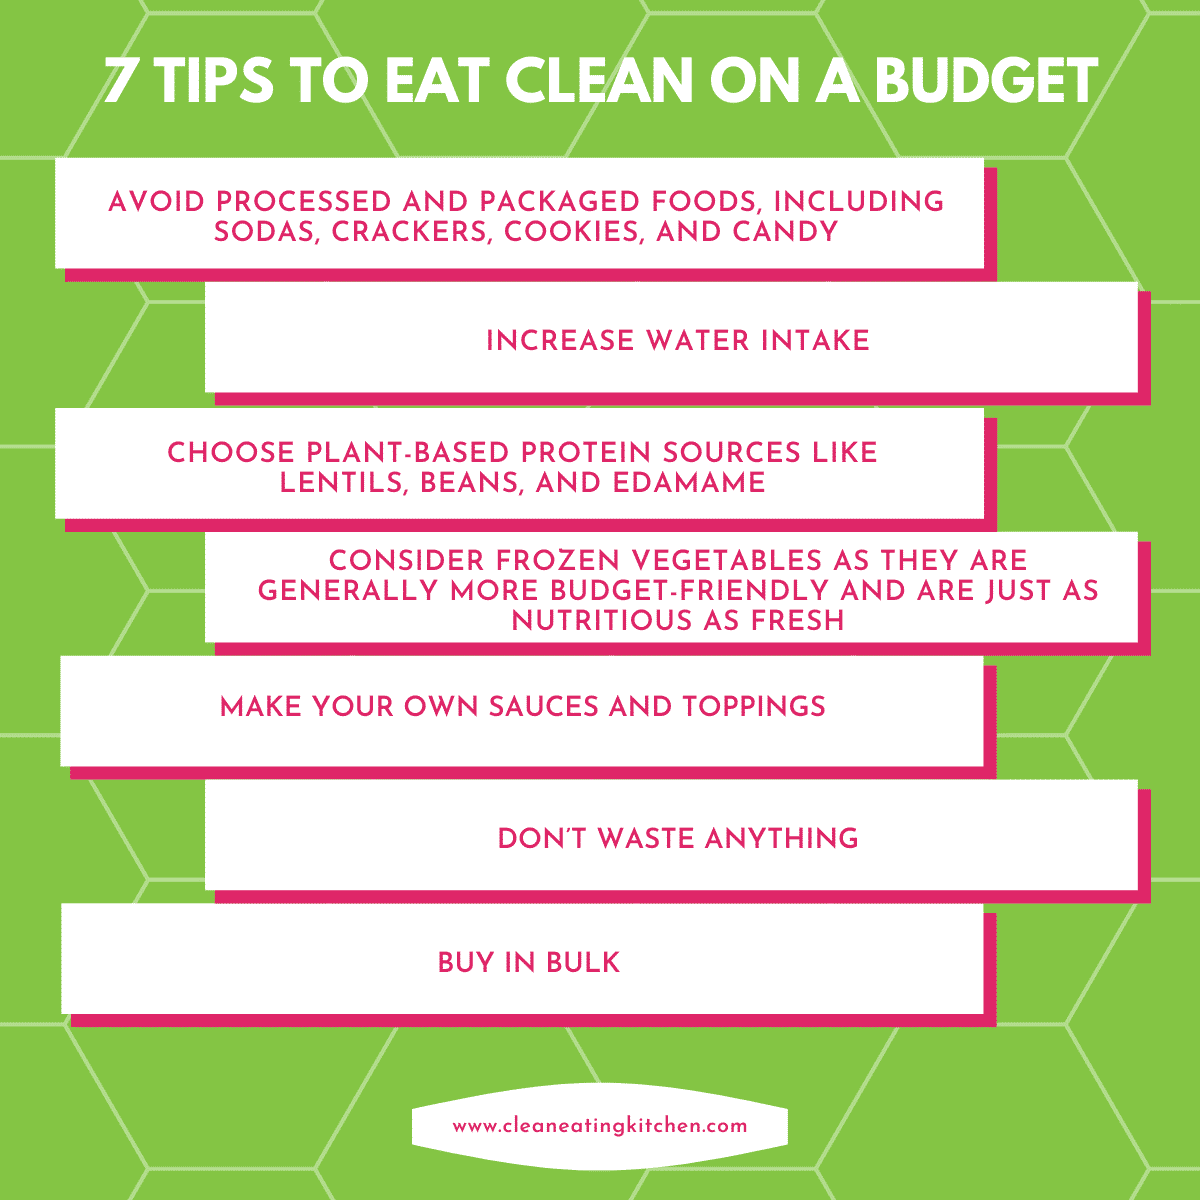 tips to eating clean on a budget infographic.